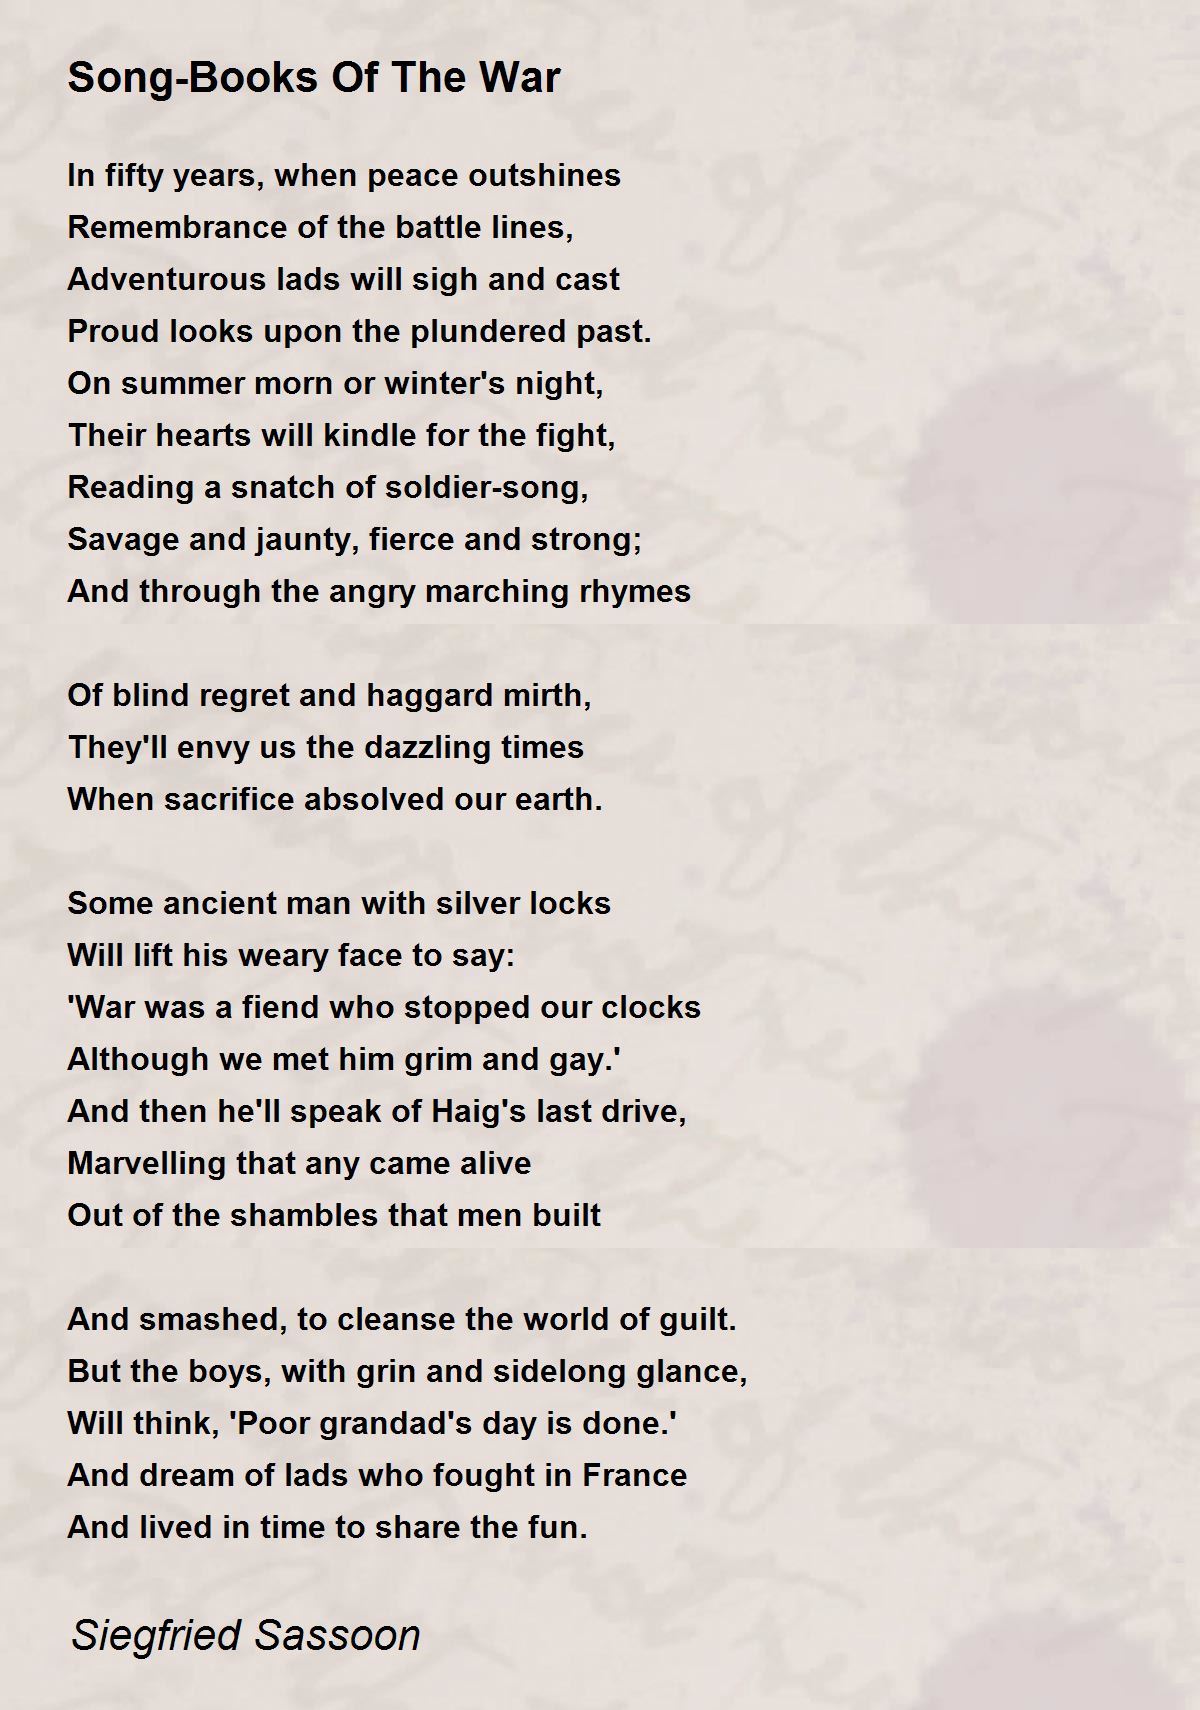 Song-Books Of The War Poem by Siegfried Sassoon - Poem Hunter